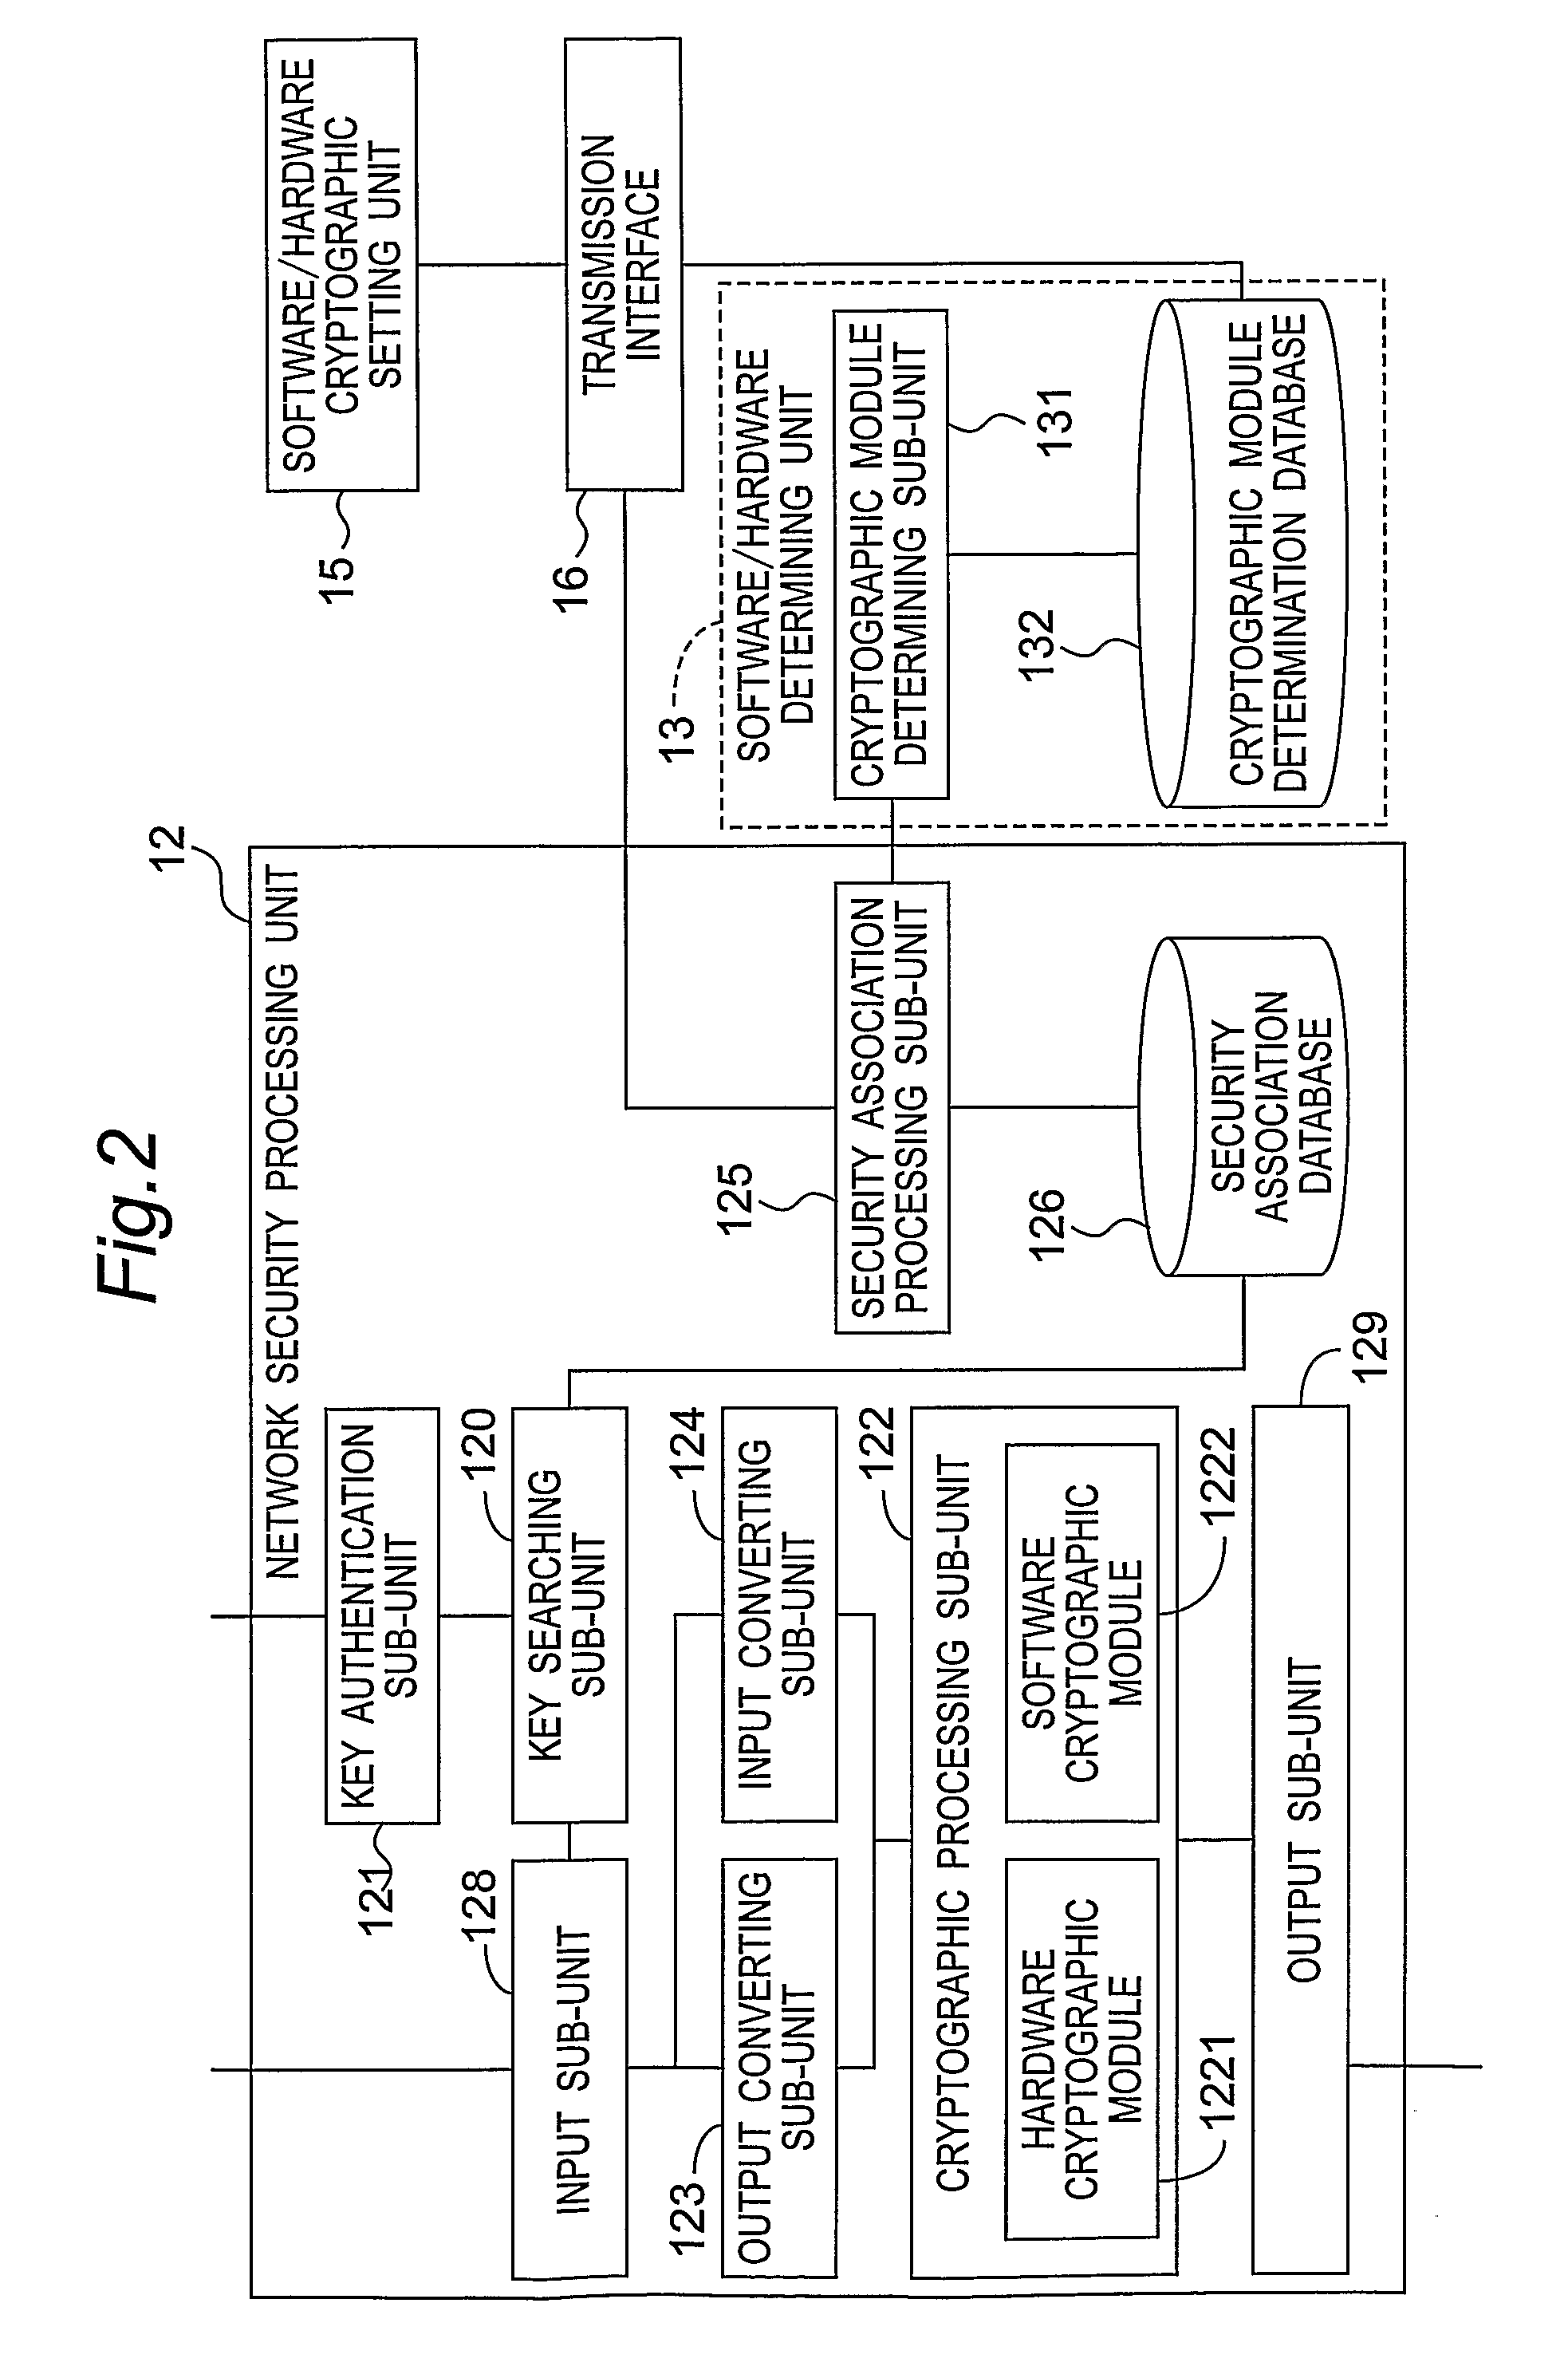 Network security processing method and system for selecting one of software and hardware cryptographic modules by means of multimedia session information